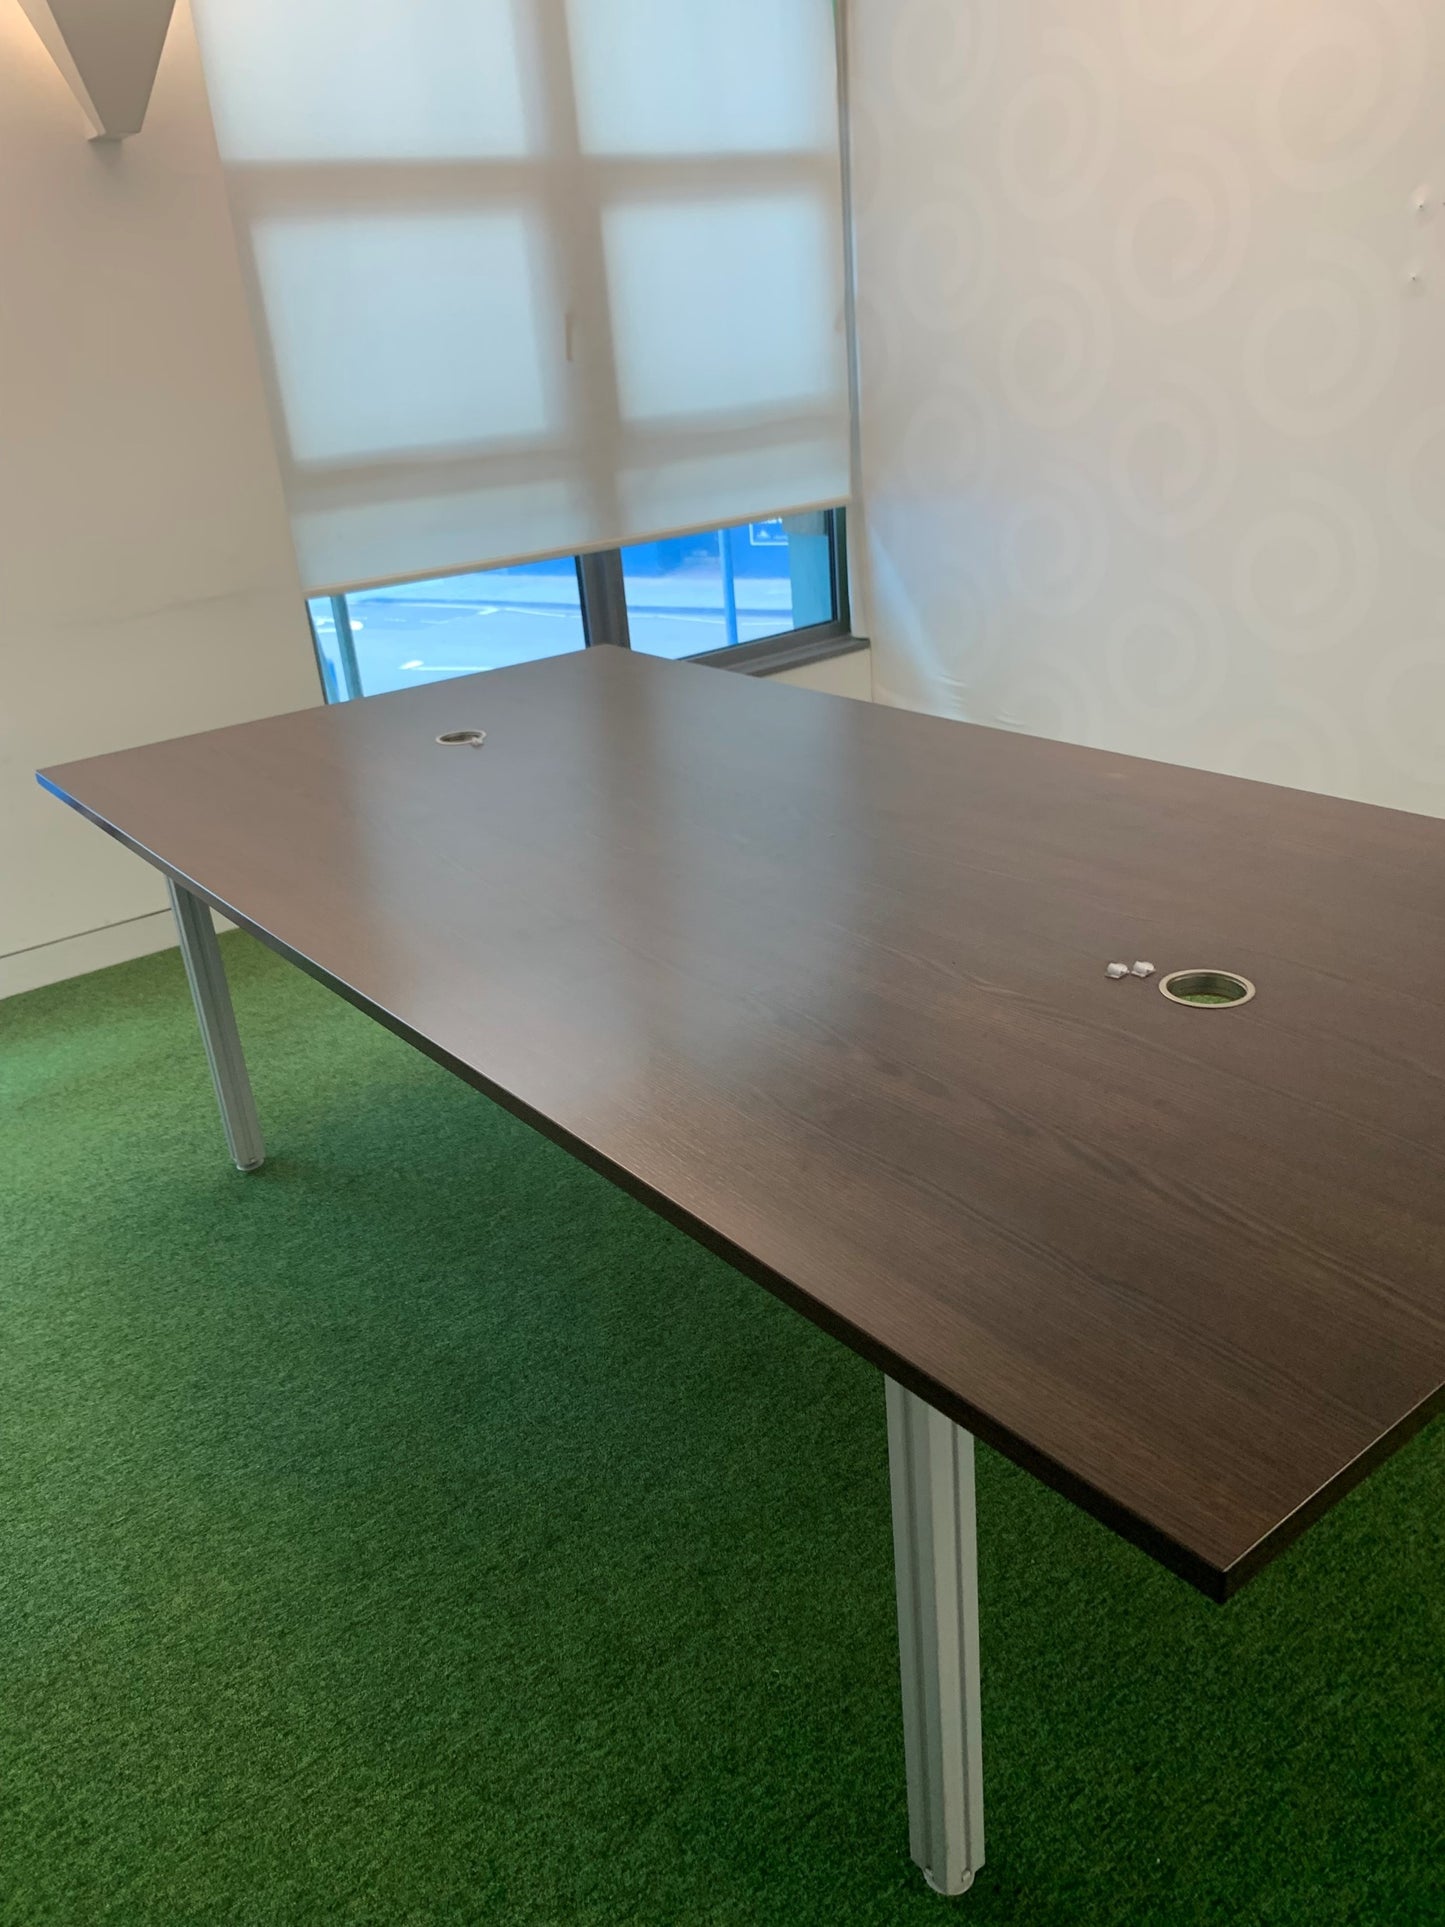 Brown boardroom table in room with large windows